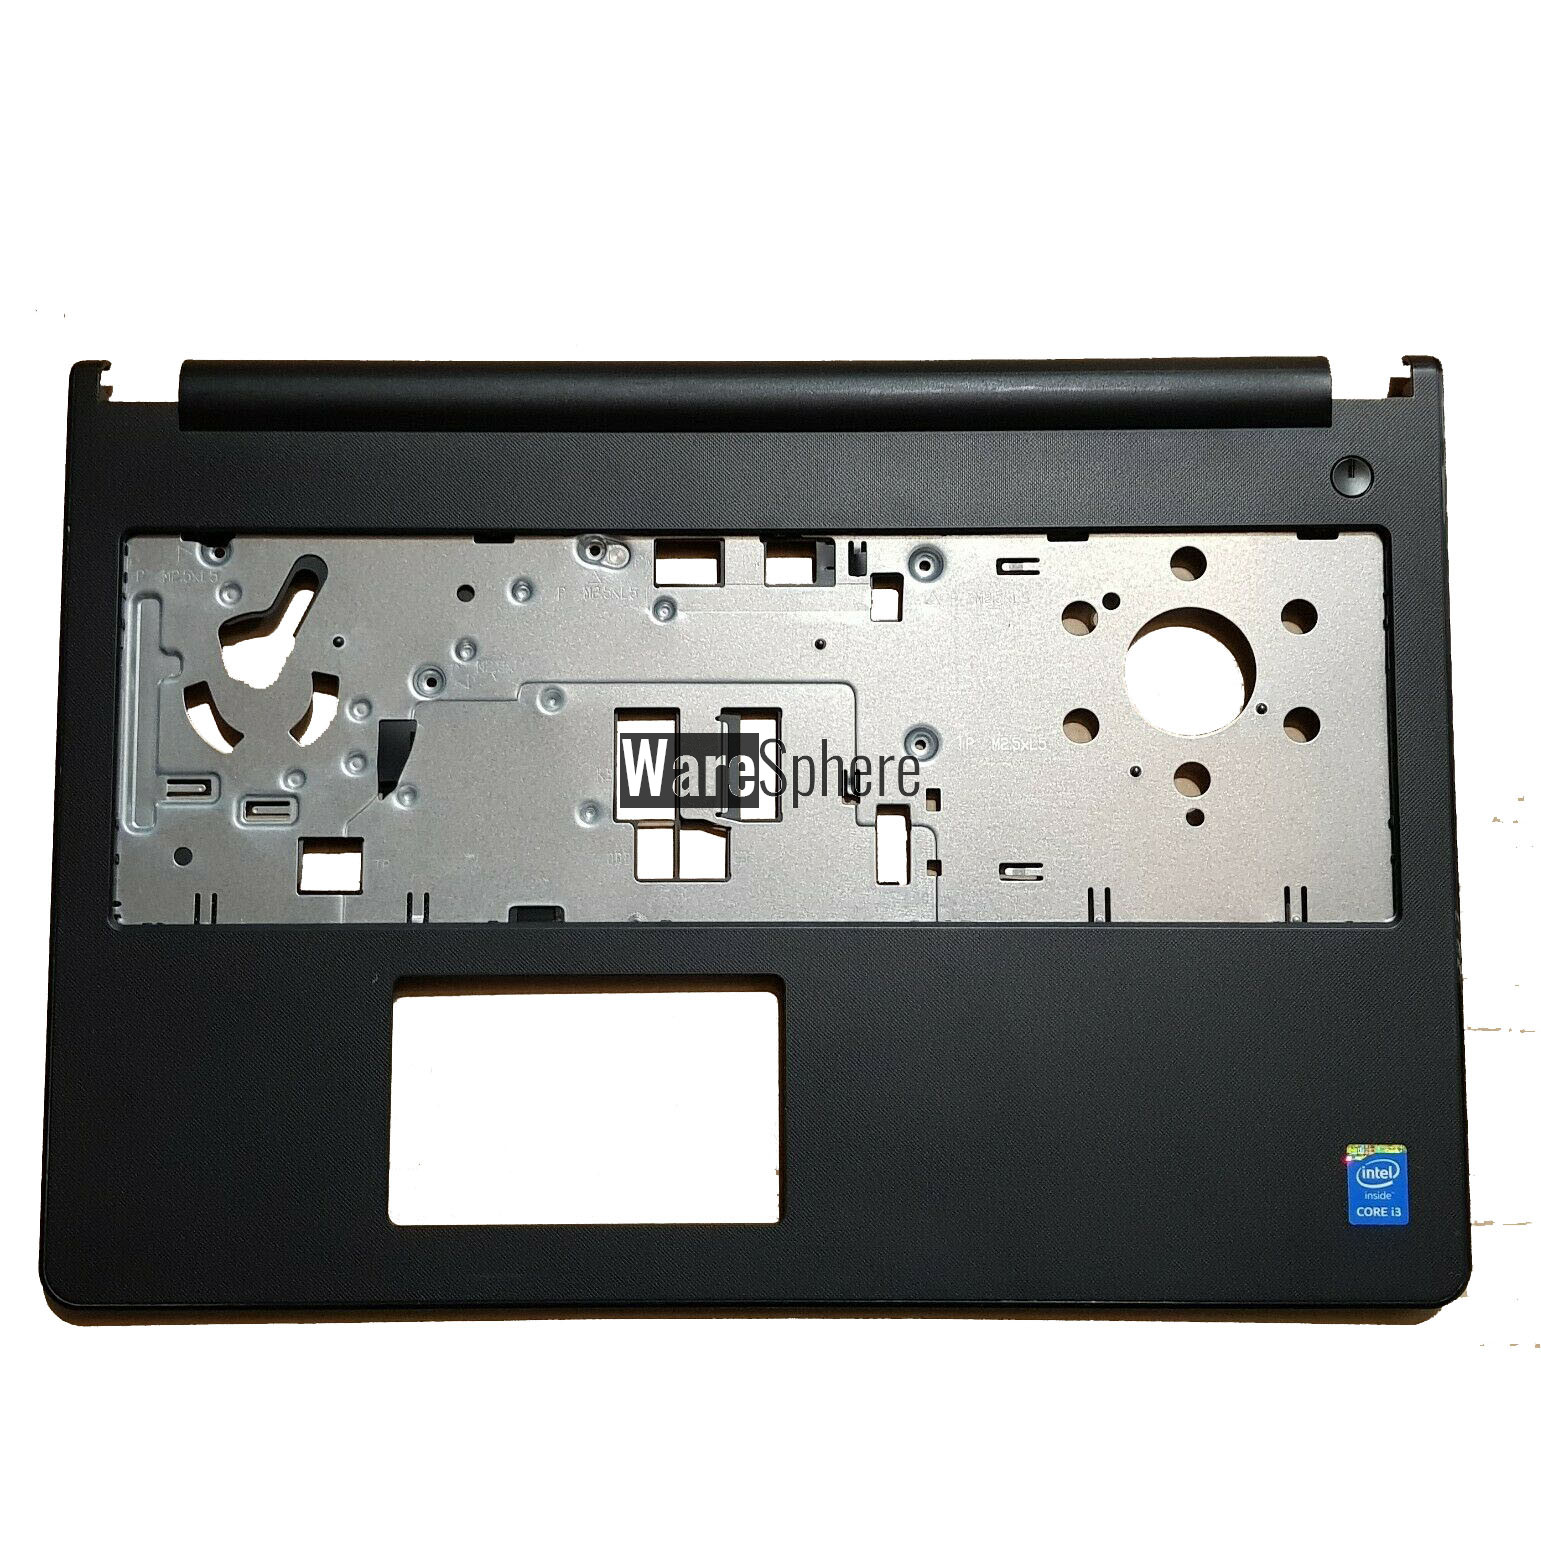 Top Cover Upper Case for Dell Inspiron 15 3558 Palmrest 0NMKX9 NMKX9